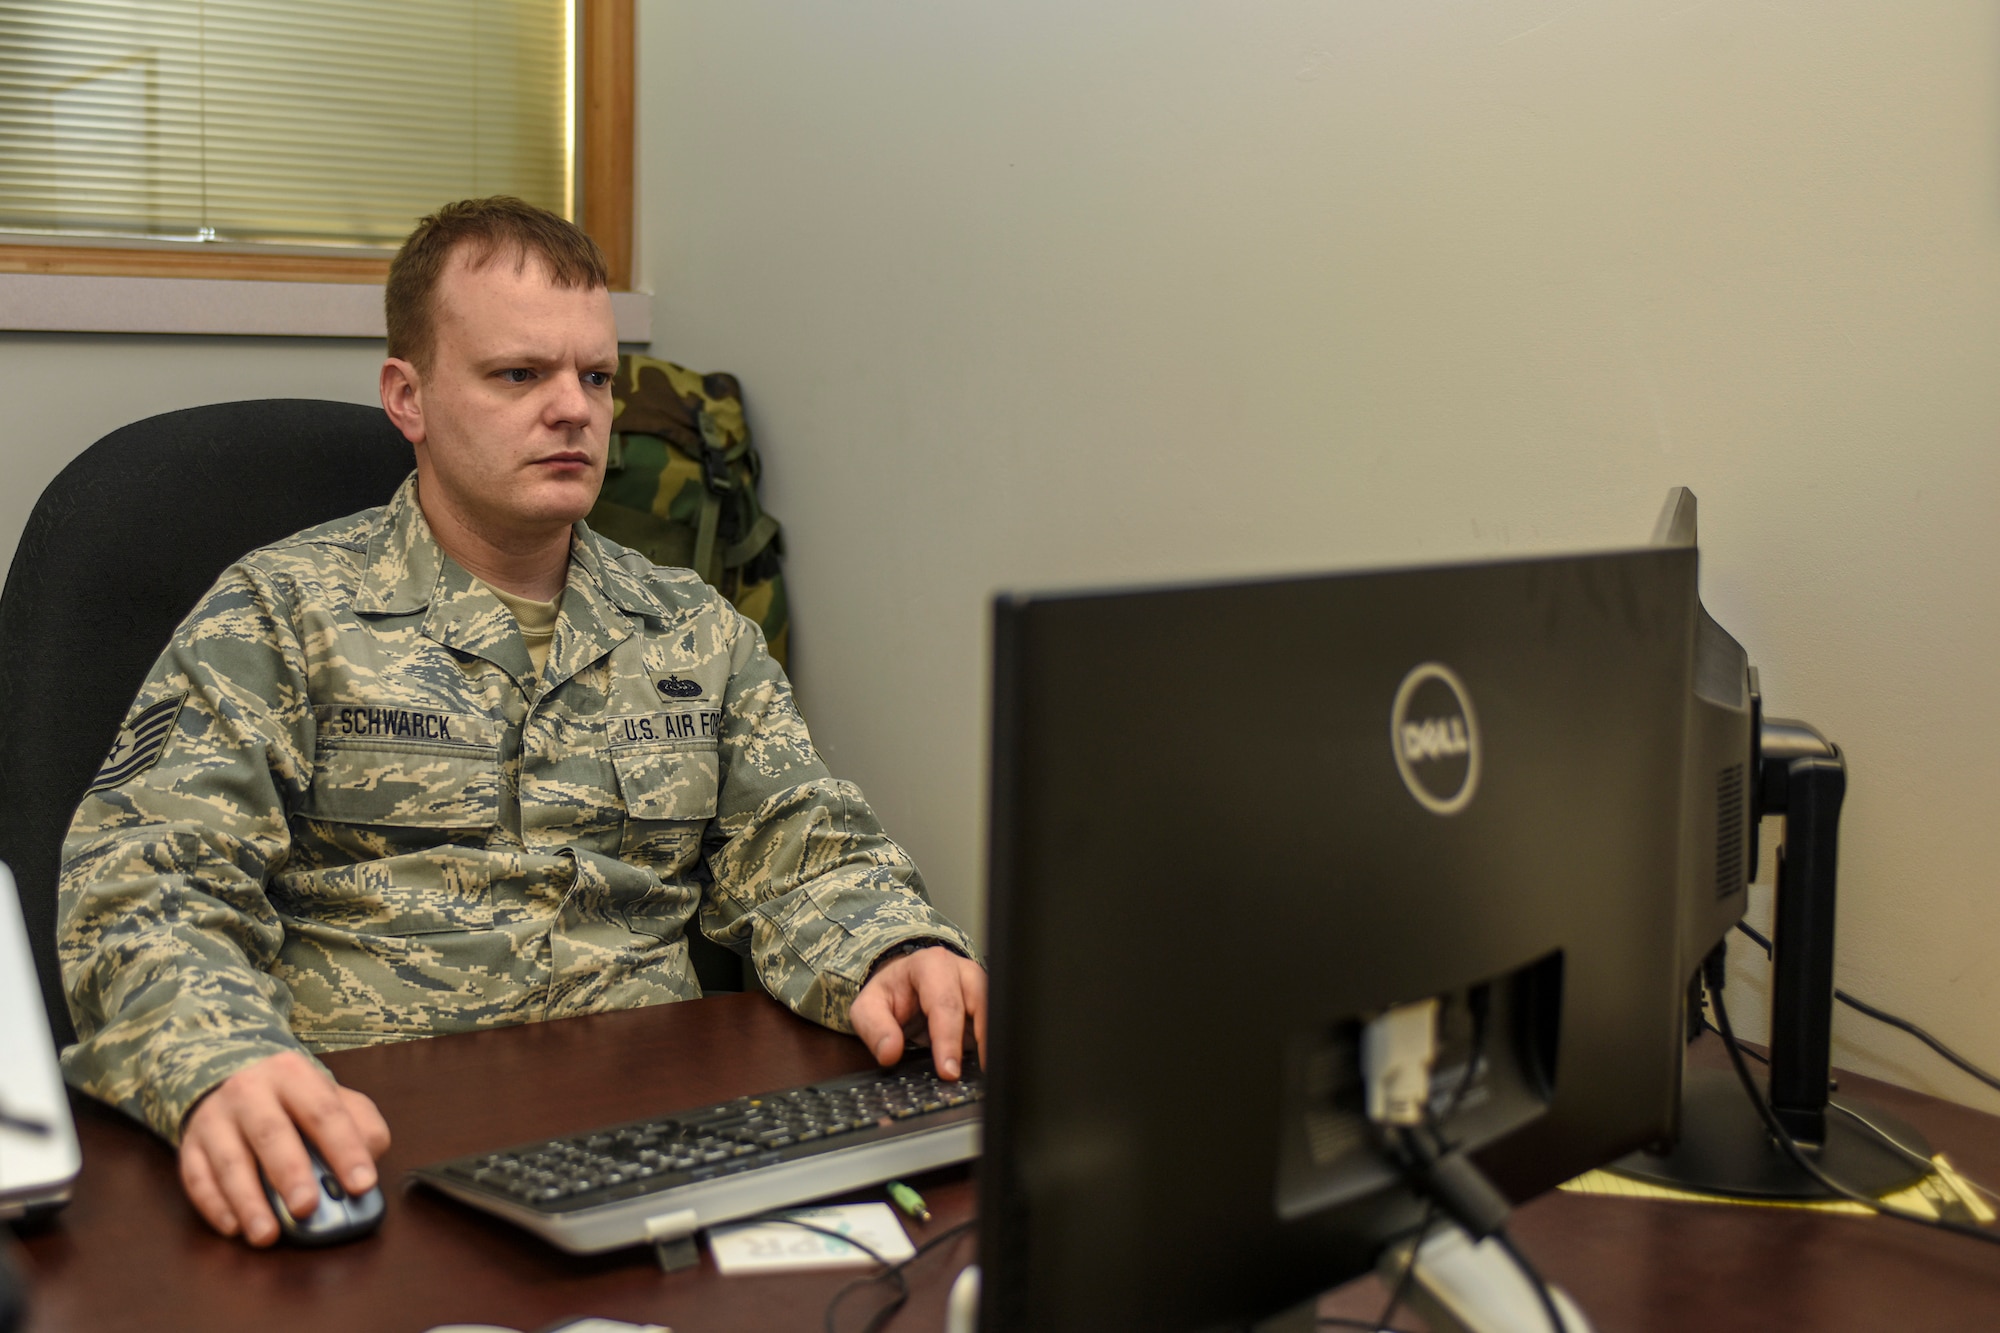 U.S. Air Force Tech. Sgt. Steven Schwarck, cyberspace operations, 121st Air Refueling Wing Communications Flight, travelled to Budapest, Hungary in September 2015 as part of the National Guard State Partnership Program. (U.S. Air National Guard photo by Senior Airman Wendy Kuhn/Released)